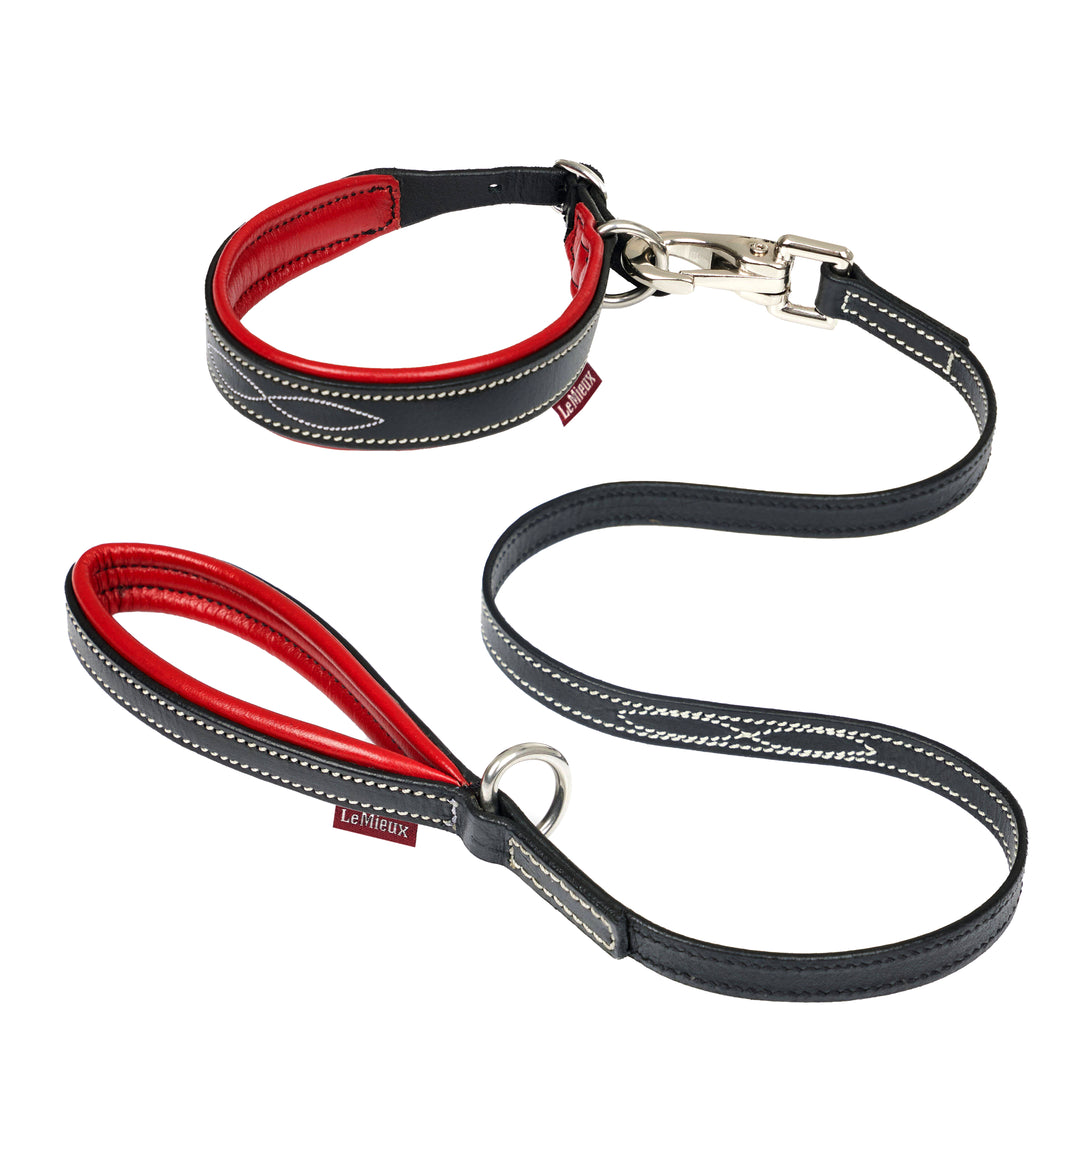 The LeMieux Toy Dog Collar & Lead in Red#Red